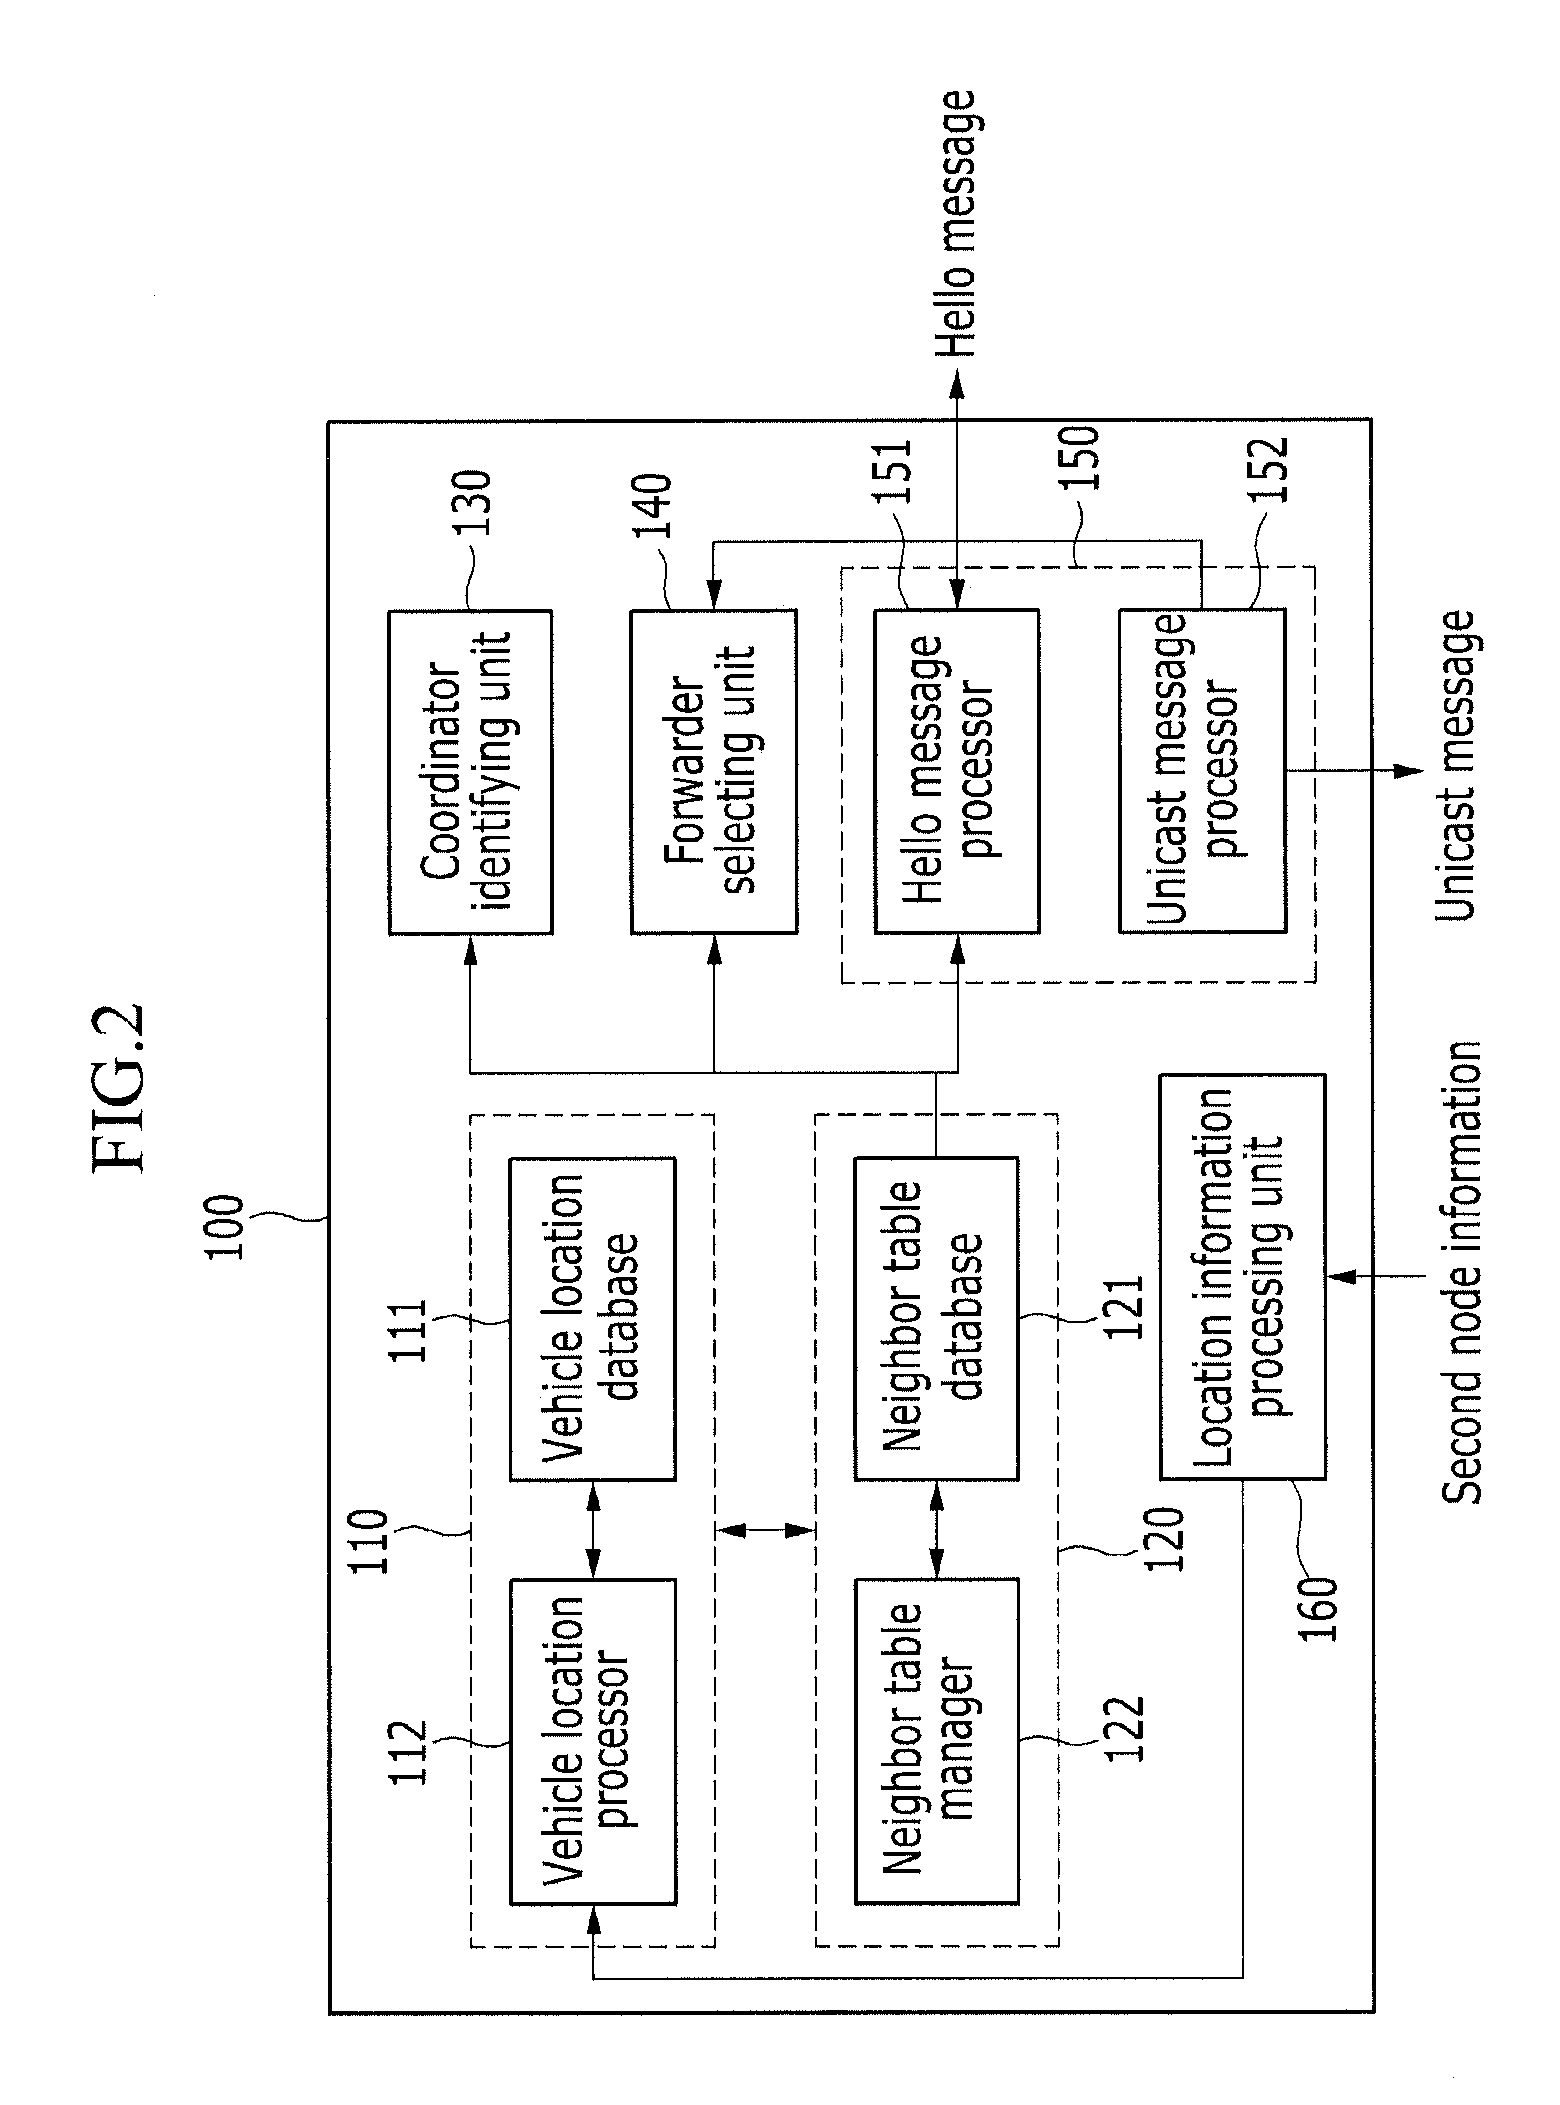 Location based vehicle multihop protocol unicast apparatus and routing method using the apparatus